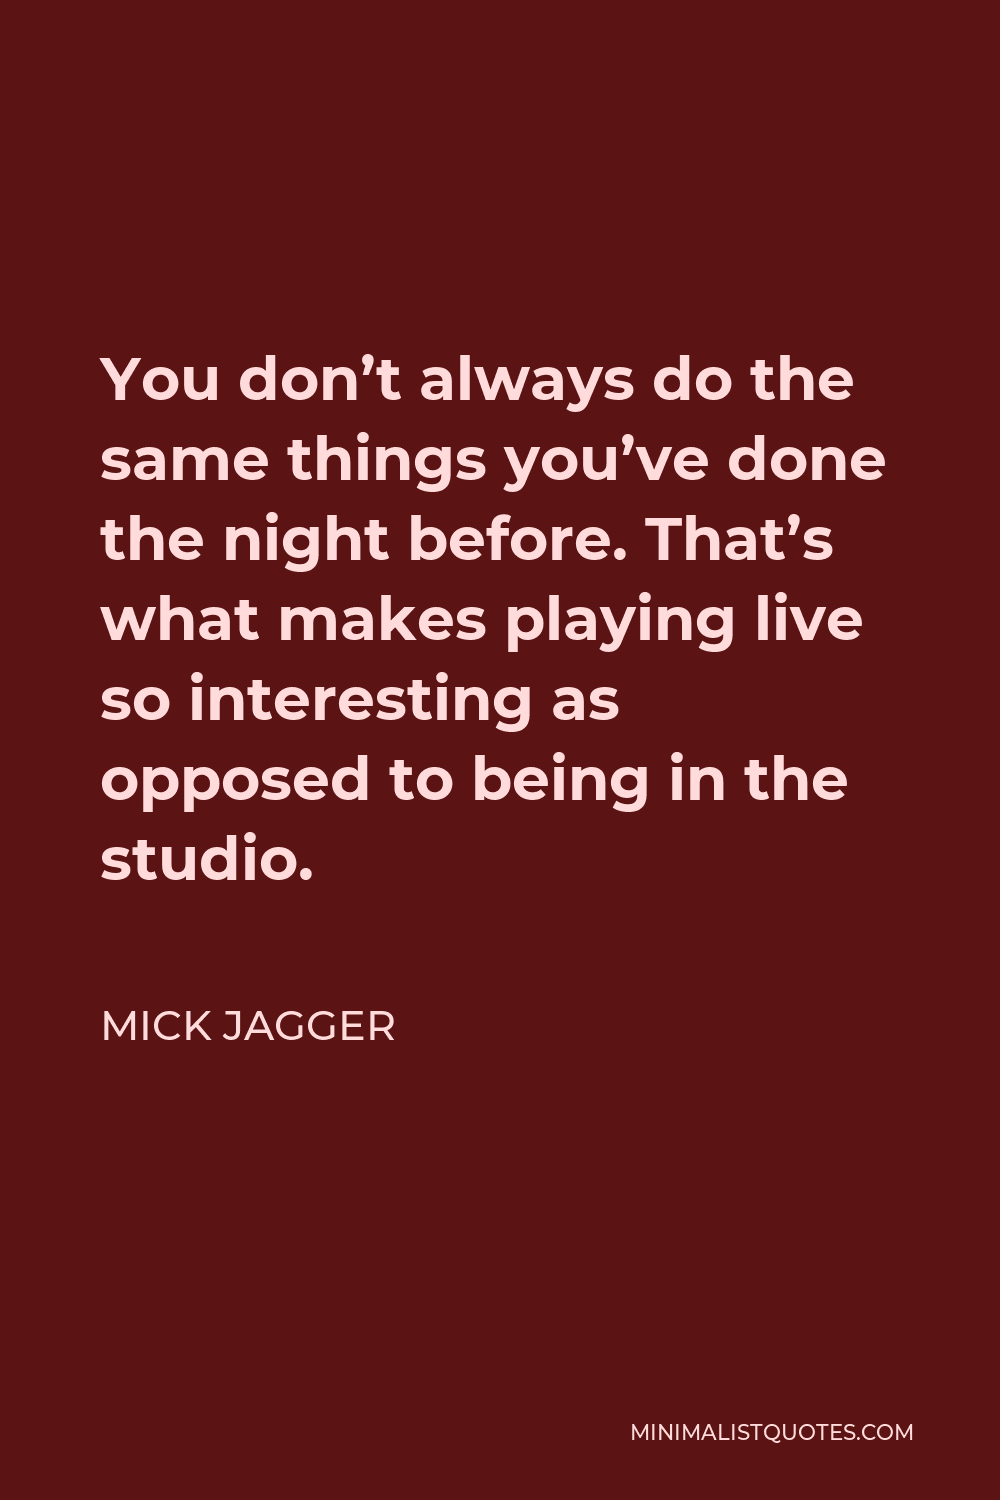 Mick Jagger Quote - You don’t always do the same things you’ve done the night before. That’s what makes playing live so interesting as opposed to being in the studio.